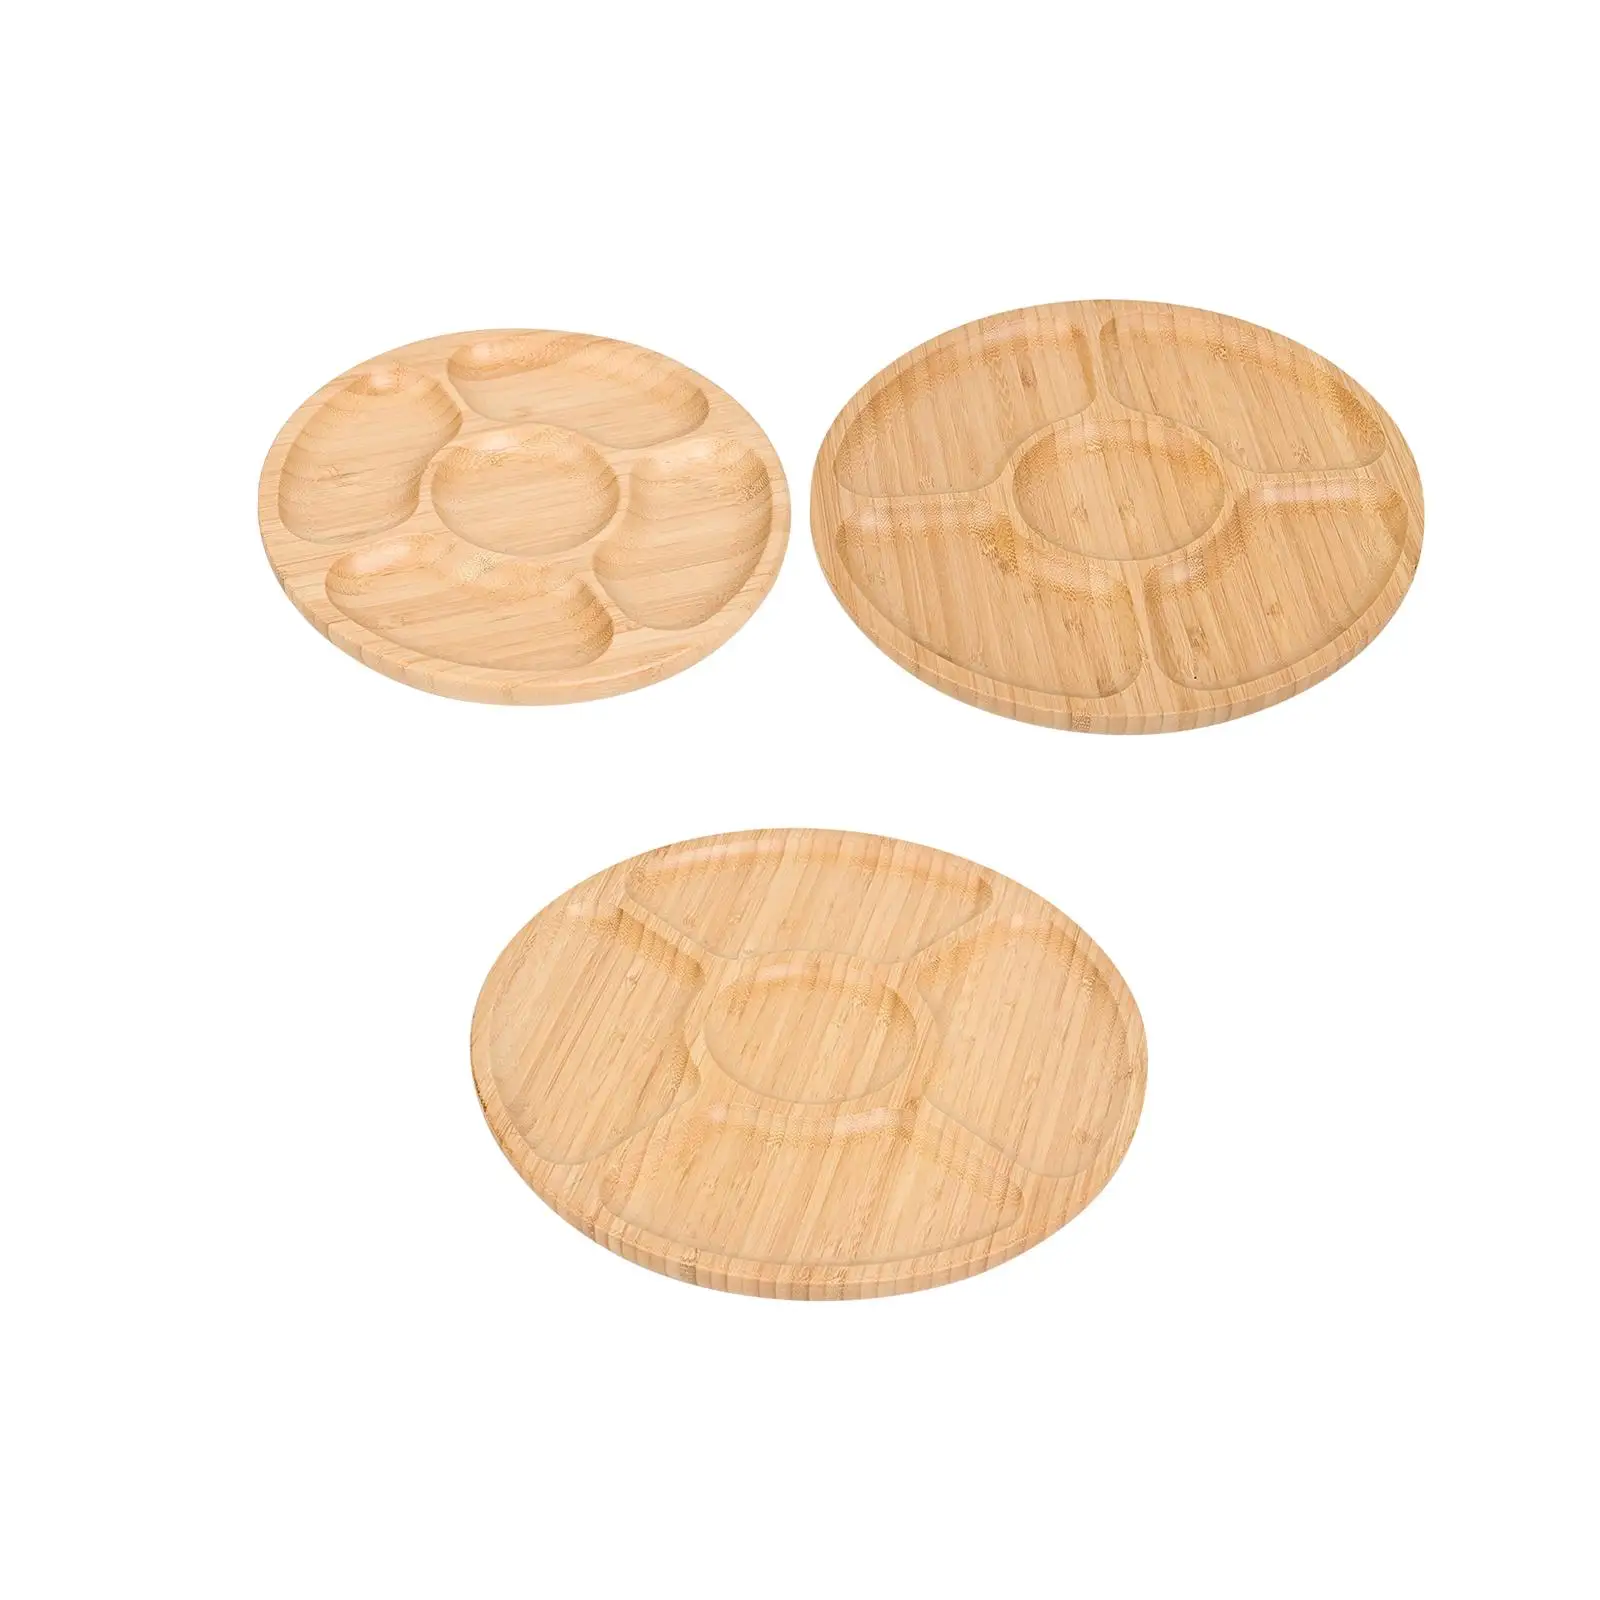 Wooden Tray Decor Family Dinner Serving Dishes Snacks Plate 5 Section Fruit Plate for Cheese Dinner Appetizer Vegetable Candies